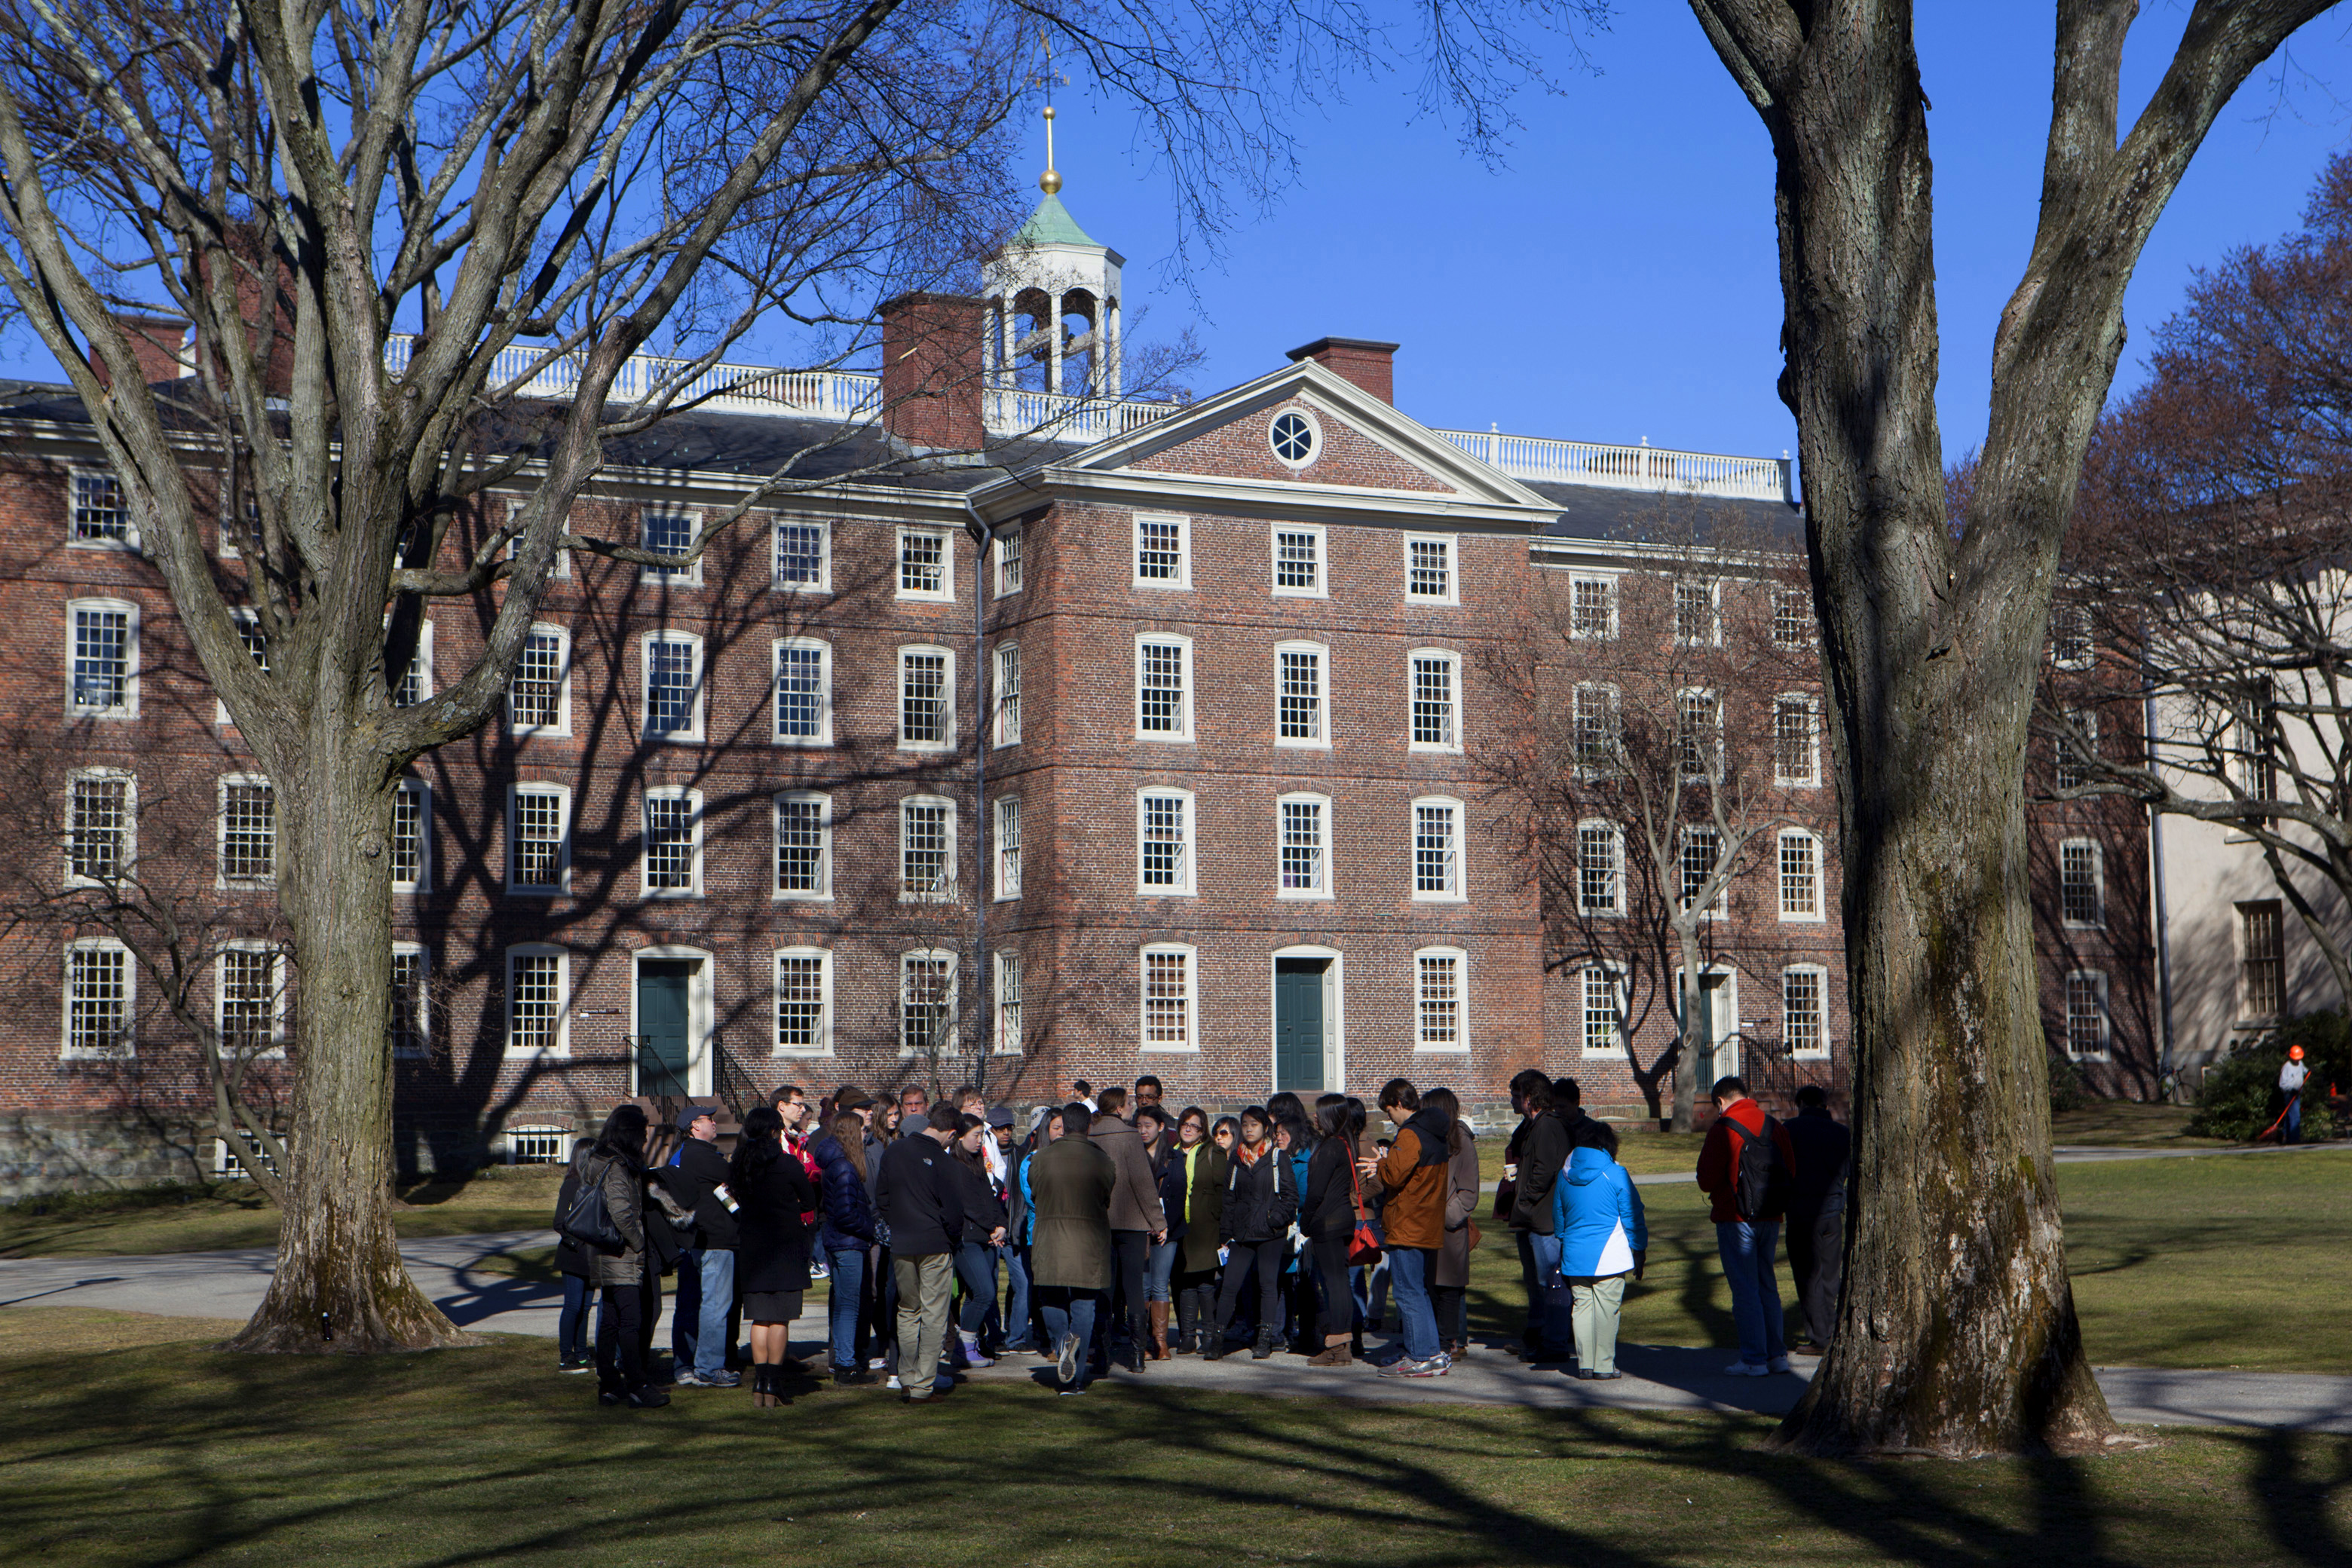 Thousands welcomed: With four tours and two information sessions offered daily Monday through Friday, and three additional tours on Saturdays, the average tour size was around 200 people.